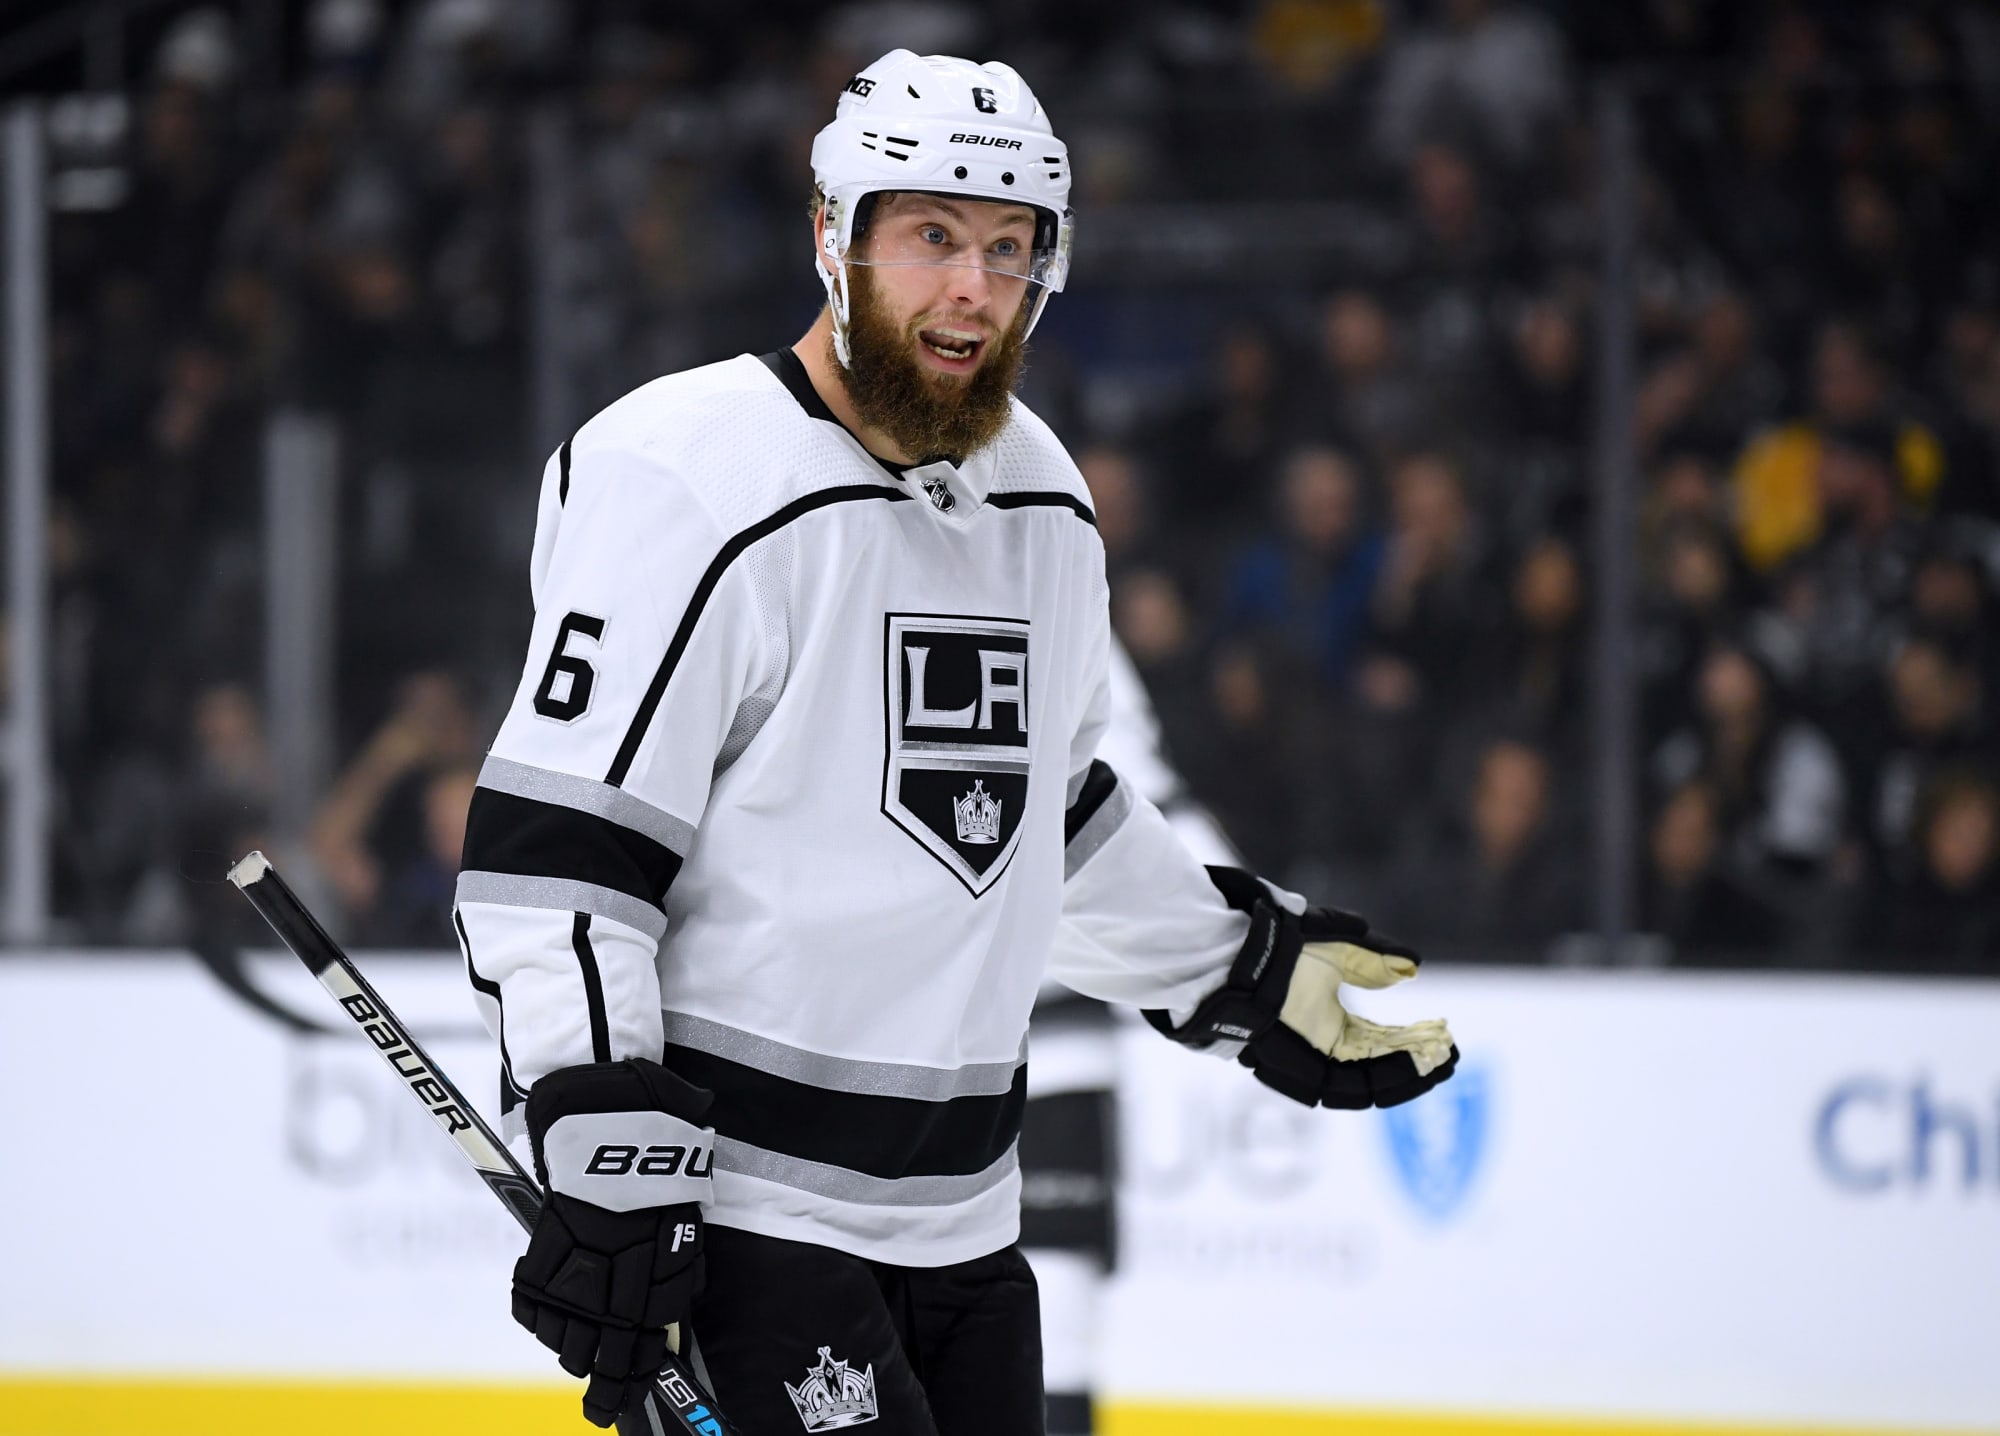 Maple Leafs defenceman Jake Muzzin out for remainder of preliminary round  series